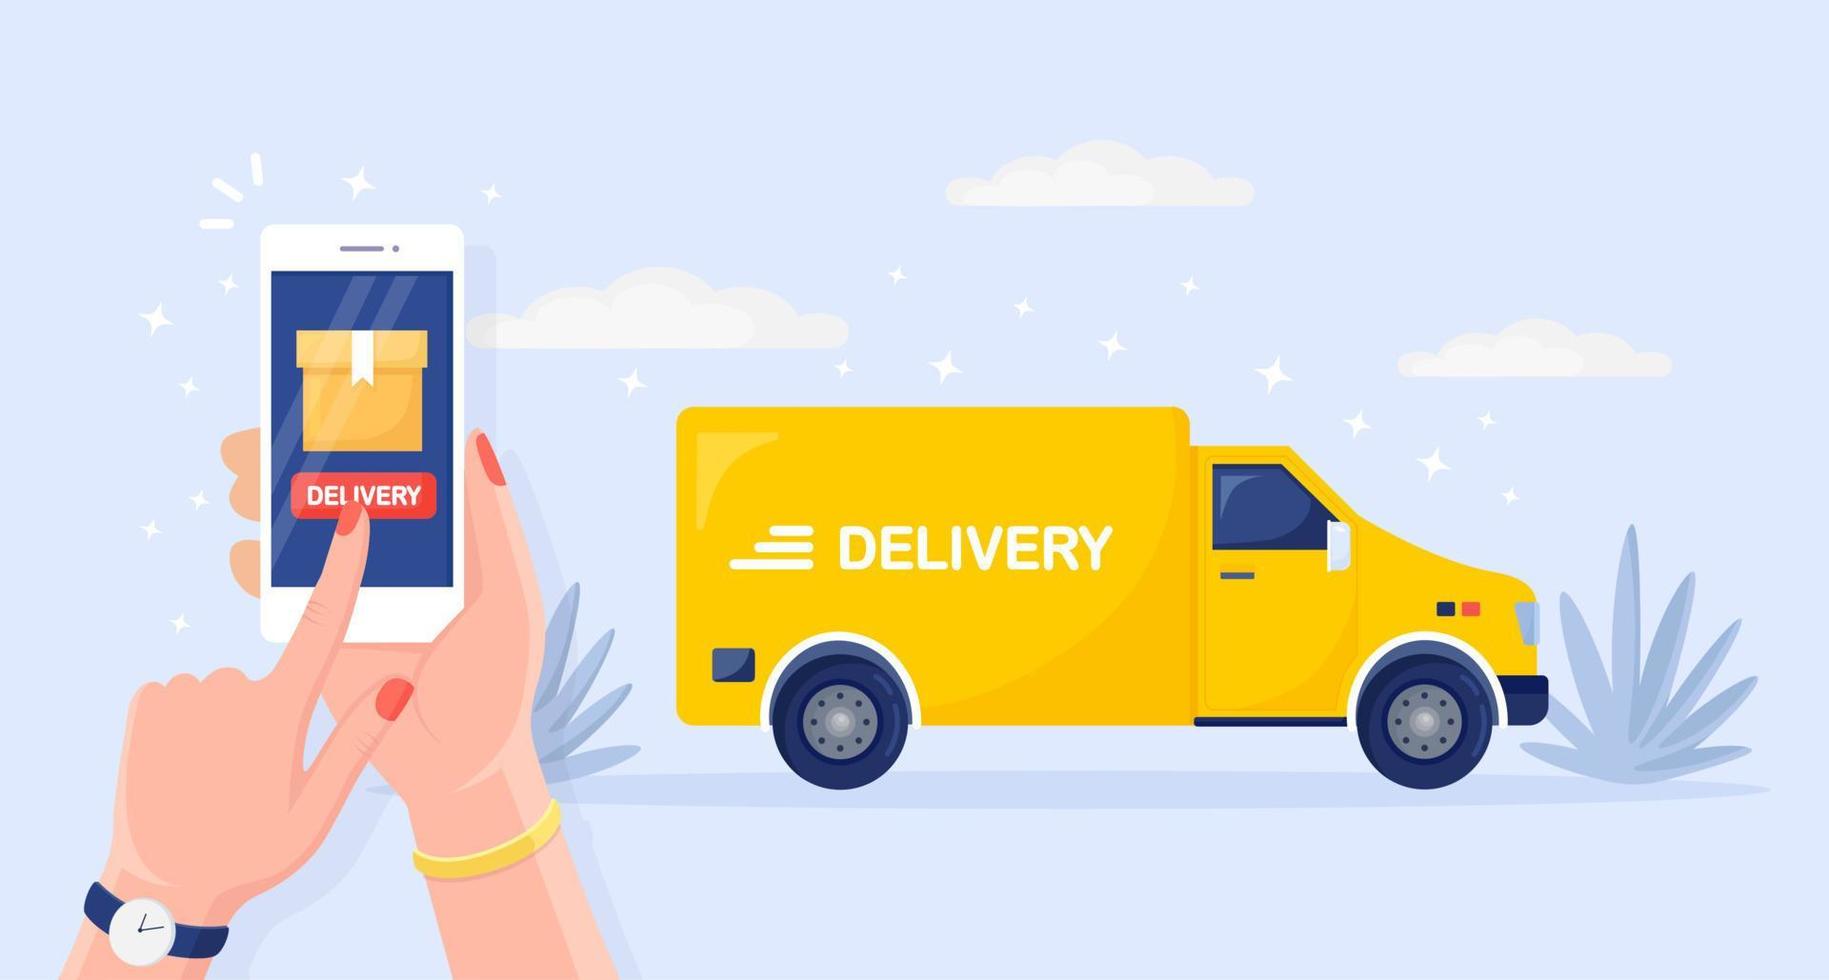 Free fast delivery service by truck, van. Courier delivers food order by auto. Hand hold phone with mobile app. Online package tracking. Vector design